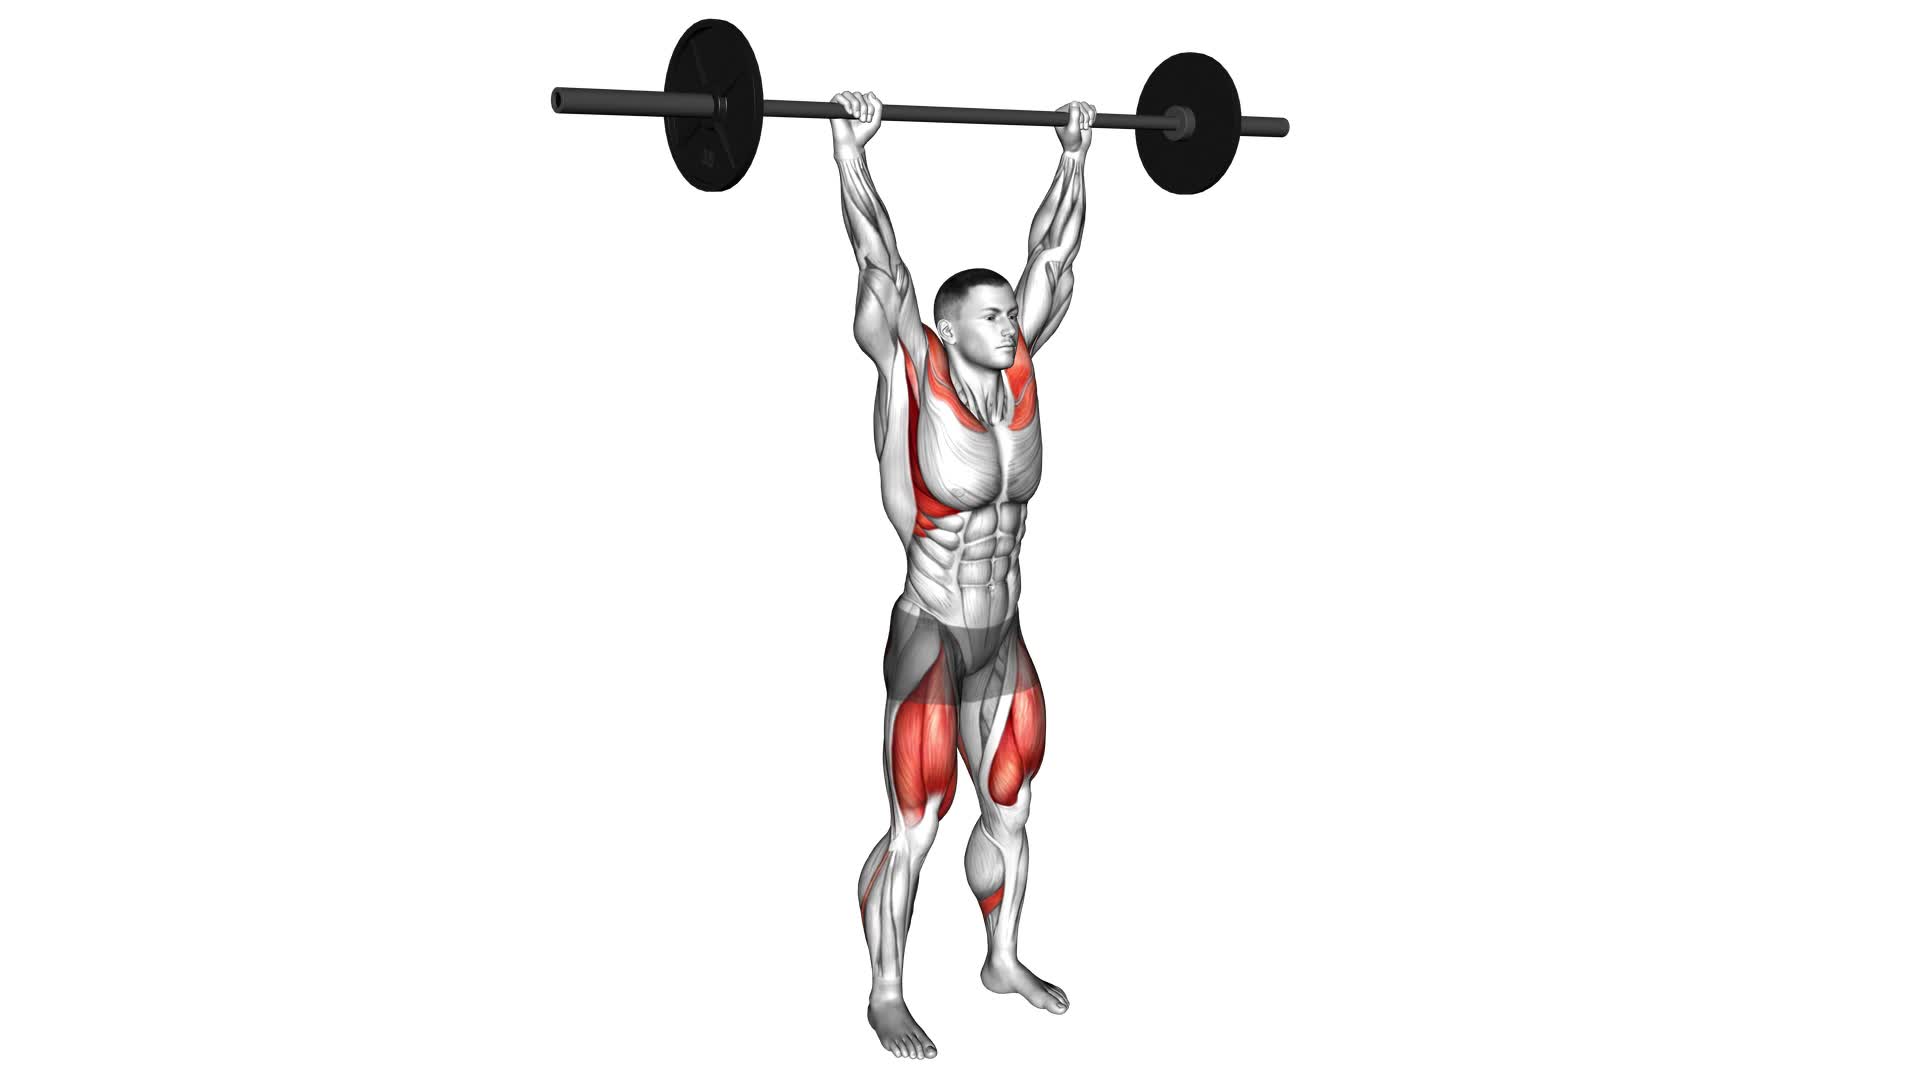 Barbell Behind the Back Push Press - Video Exercise Guide & Tips